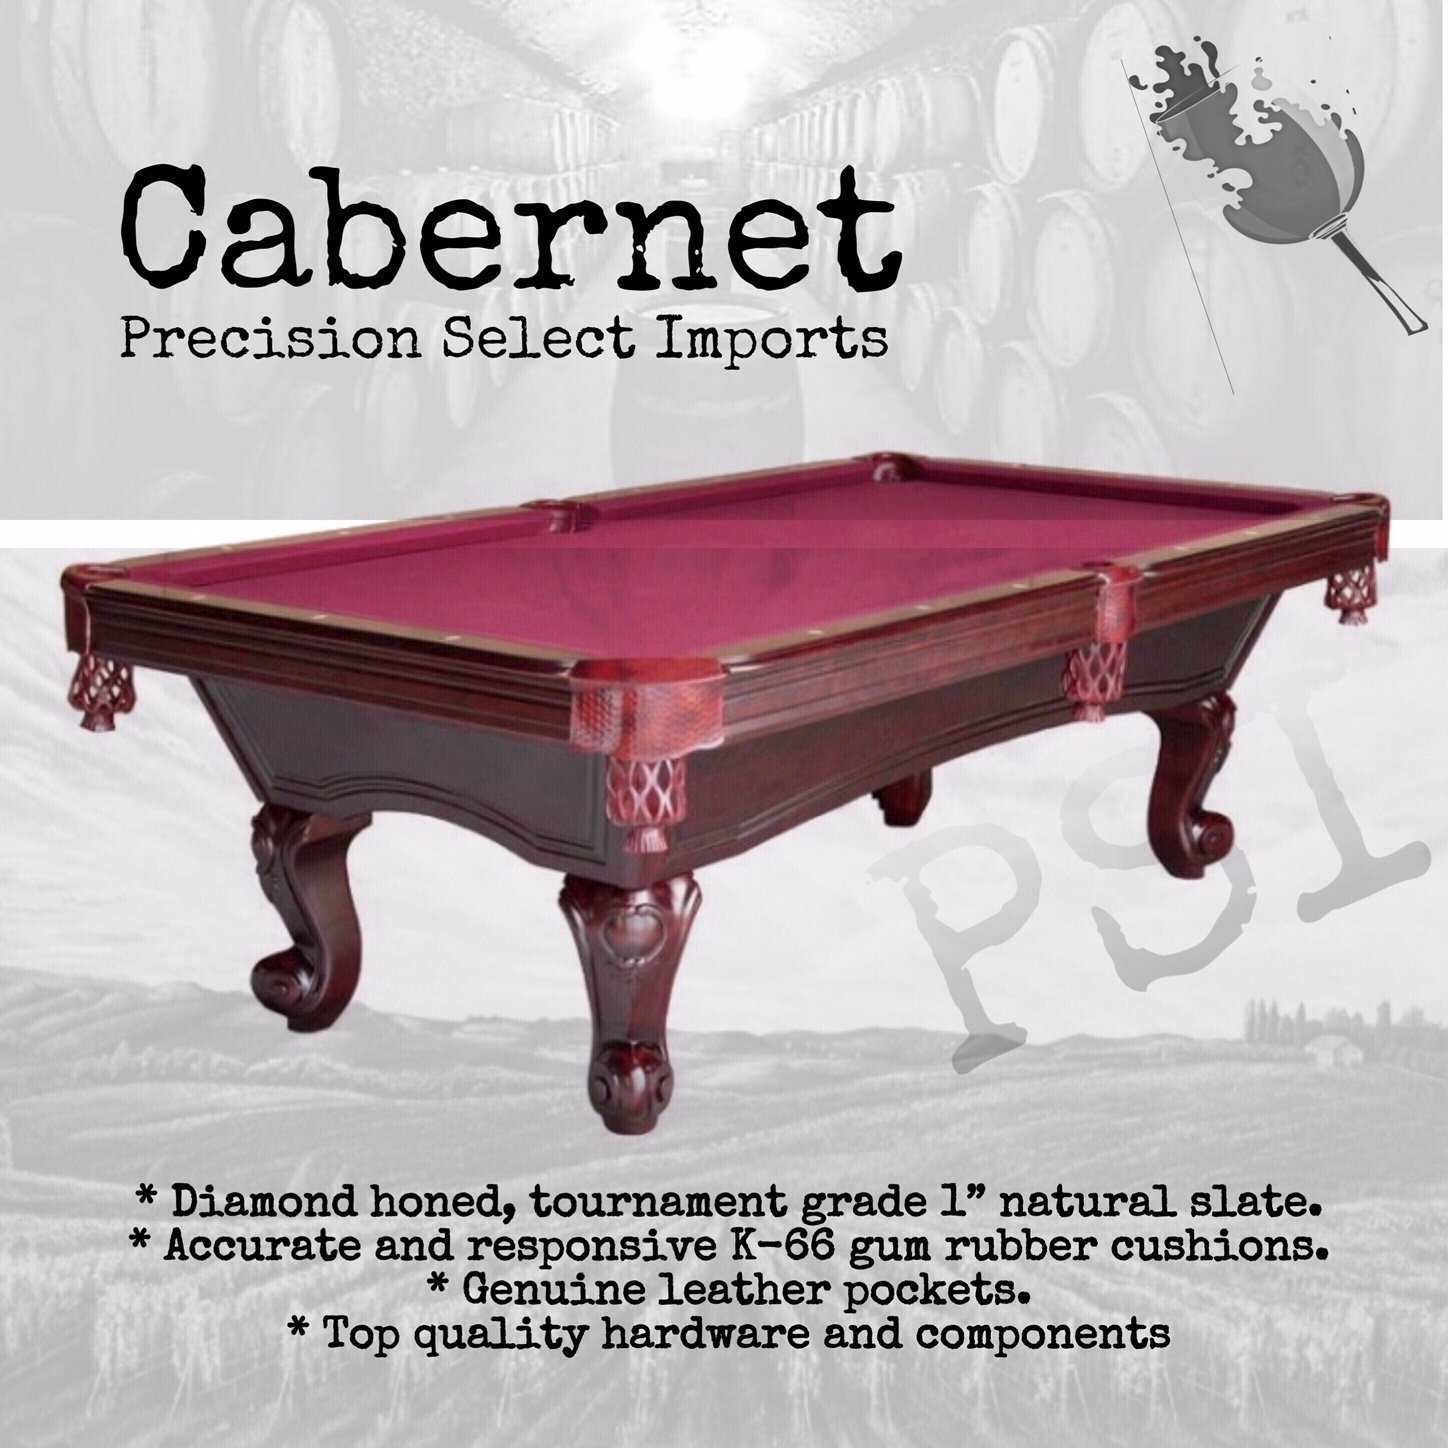 Cabernet (black) available 7-8 foot (Available in Storefront)